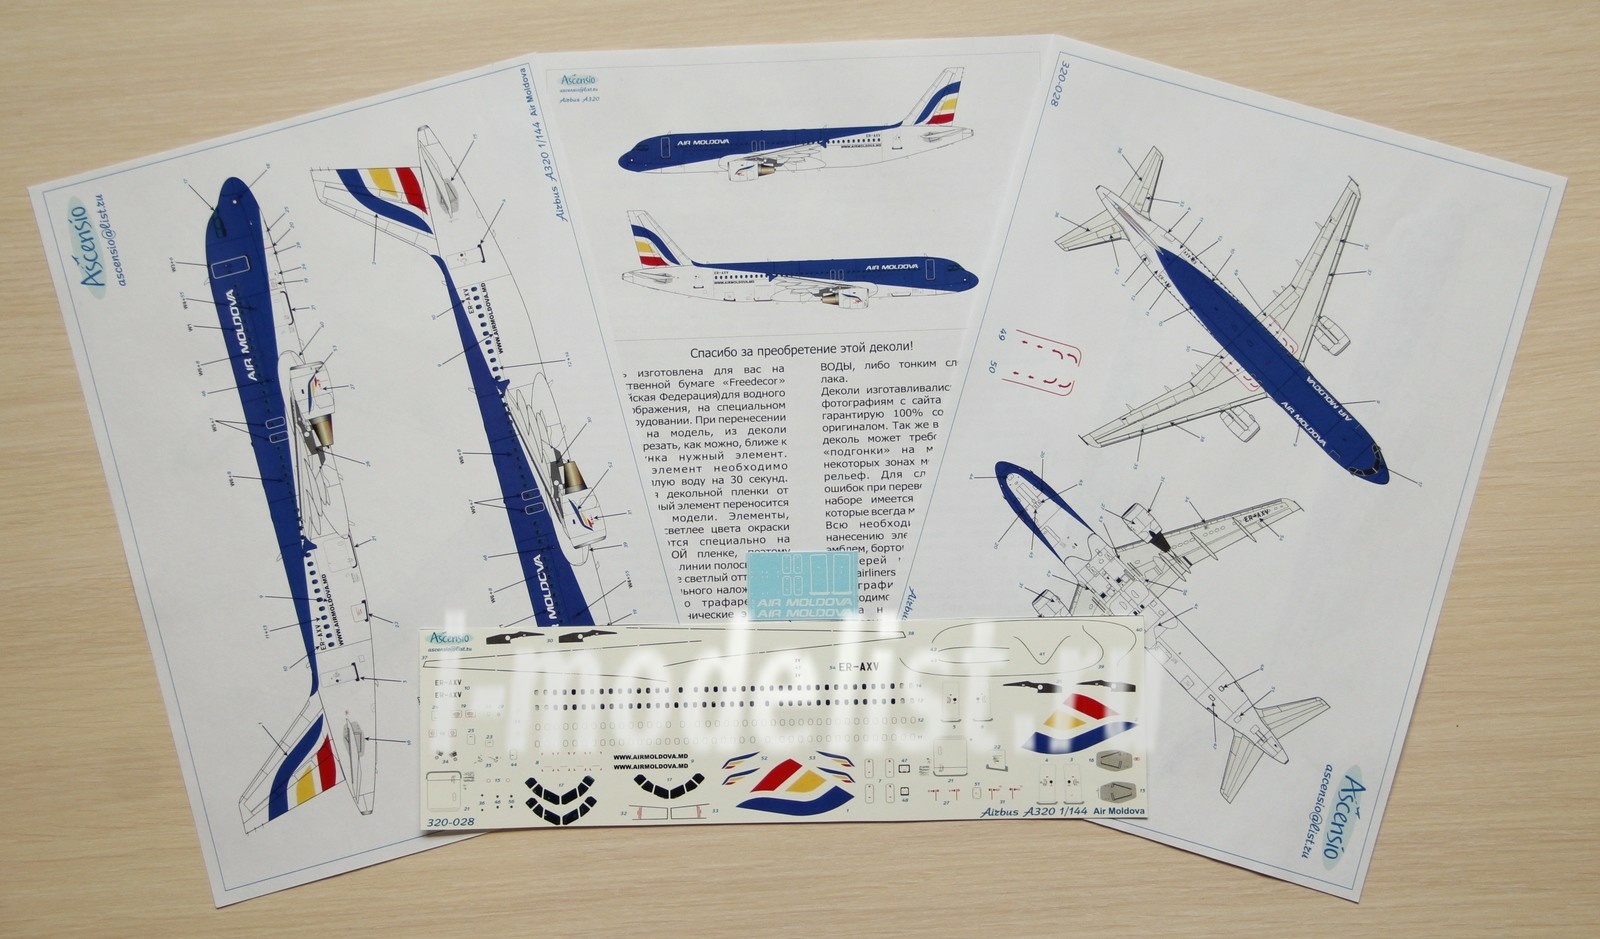 320-028 Ascensio Decal 1/144 Scales on the A320 (Air Moldova)